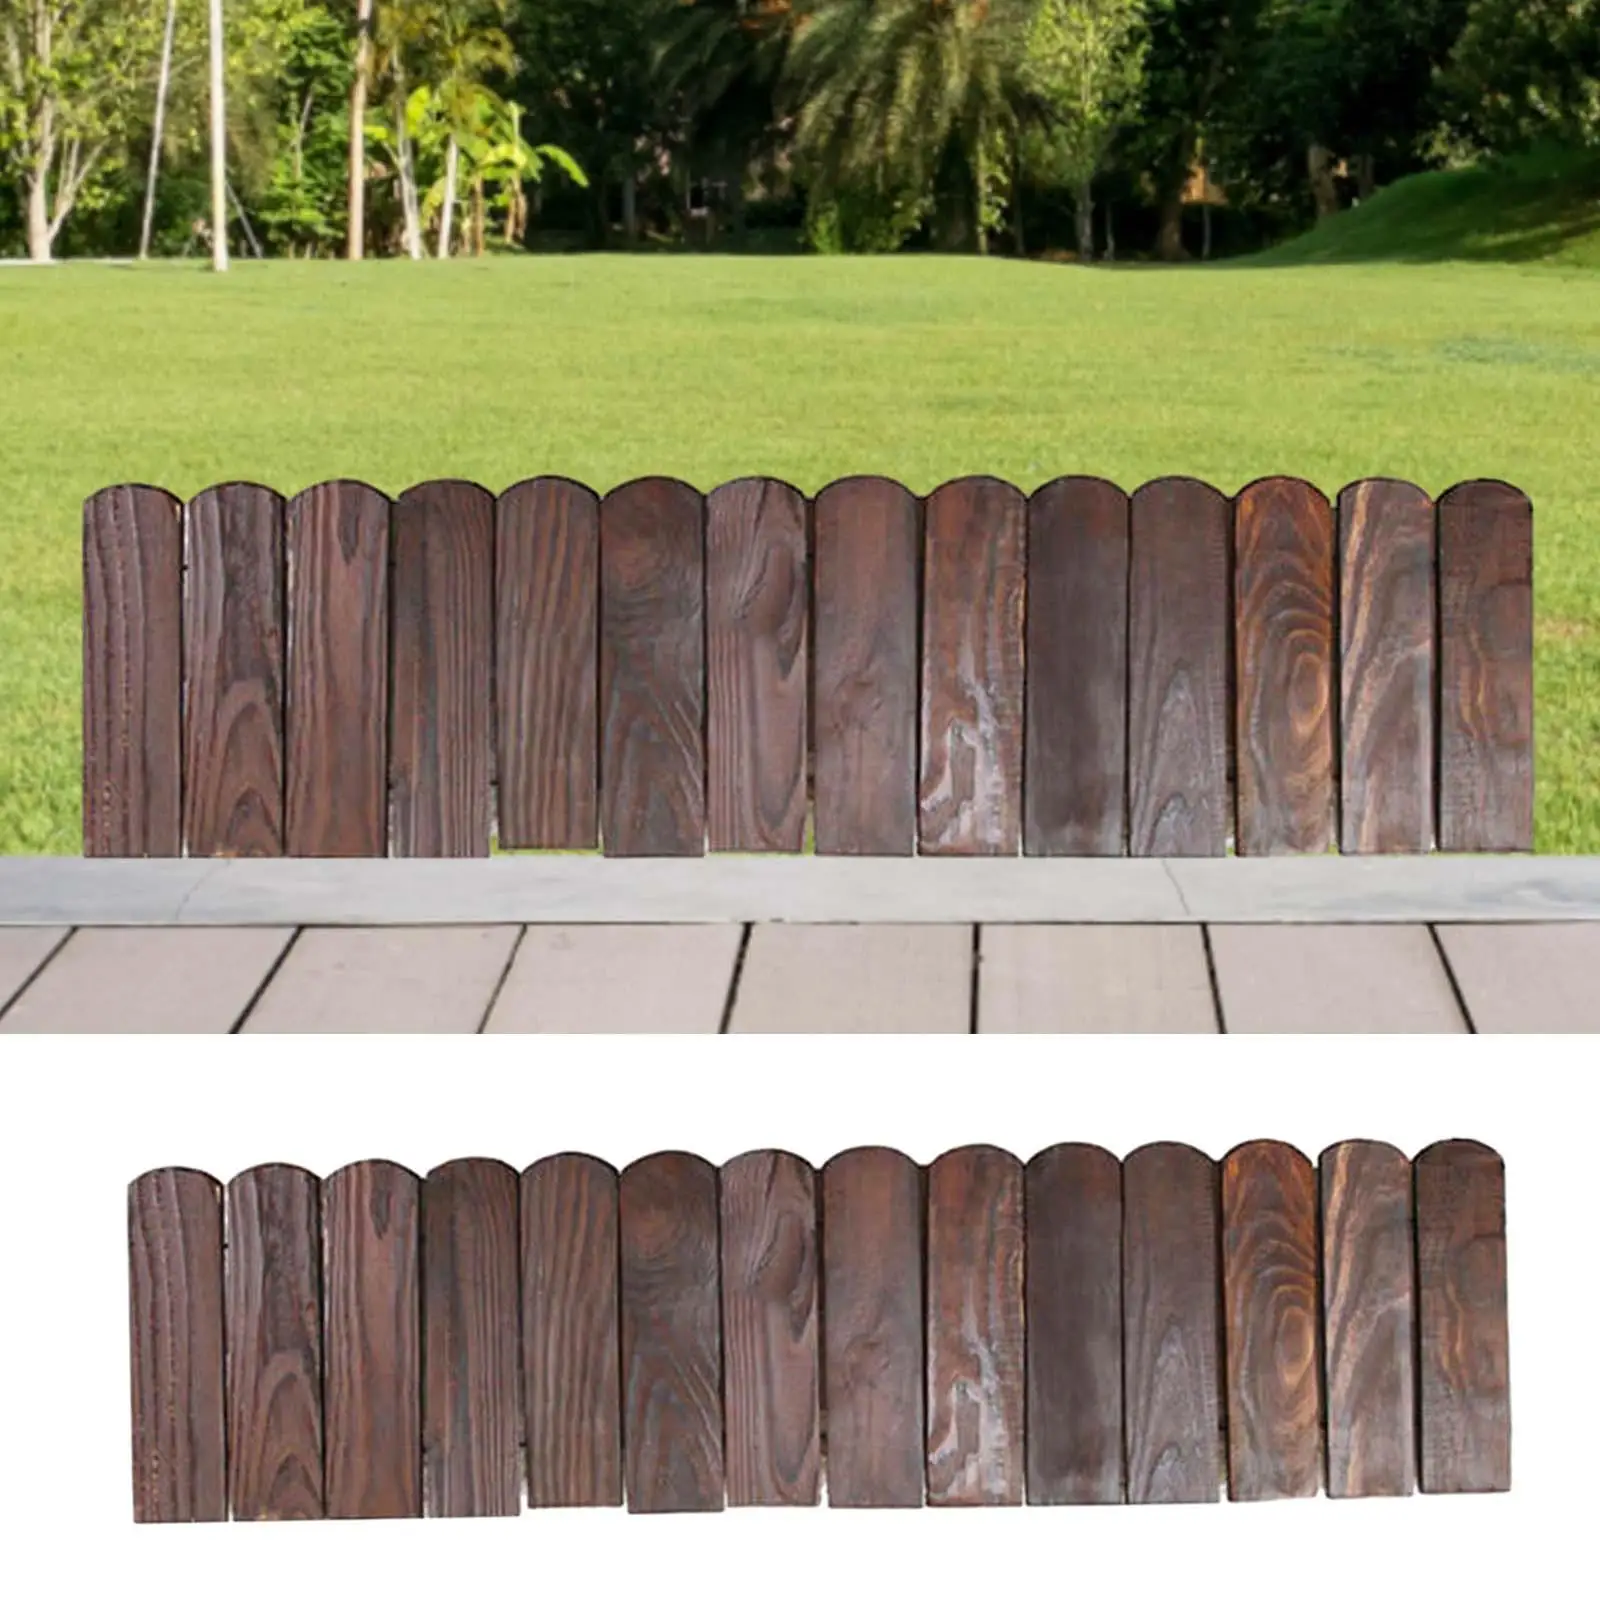 Decorative Garden Fence Detachable Fence Border for Lawn Landscaping Walkway